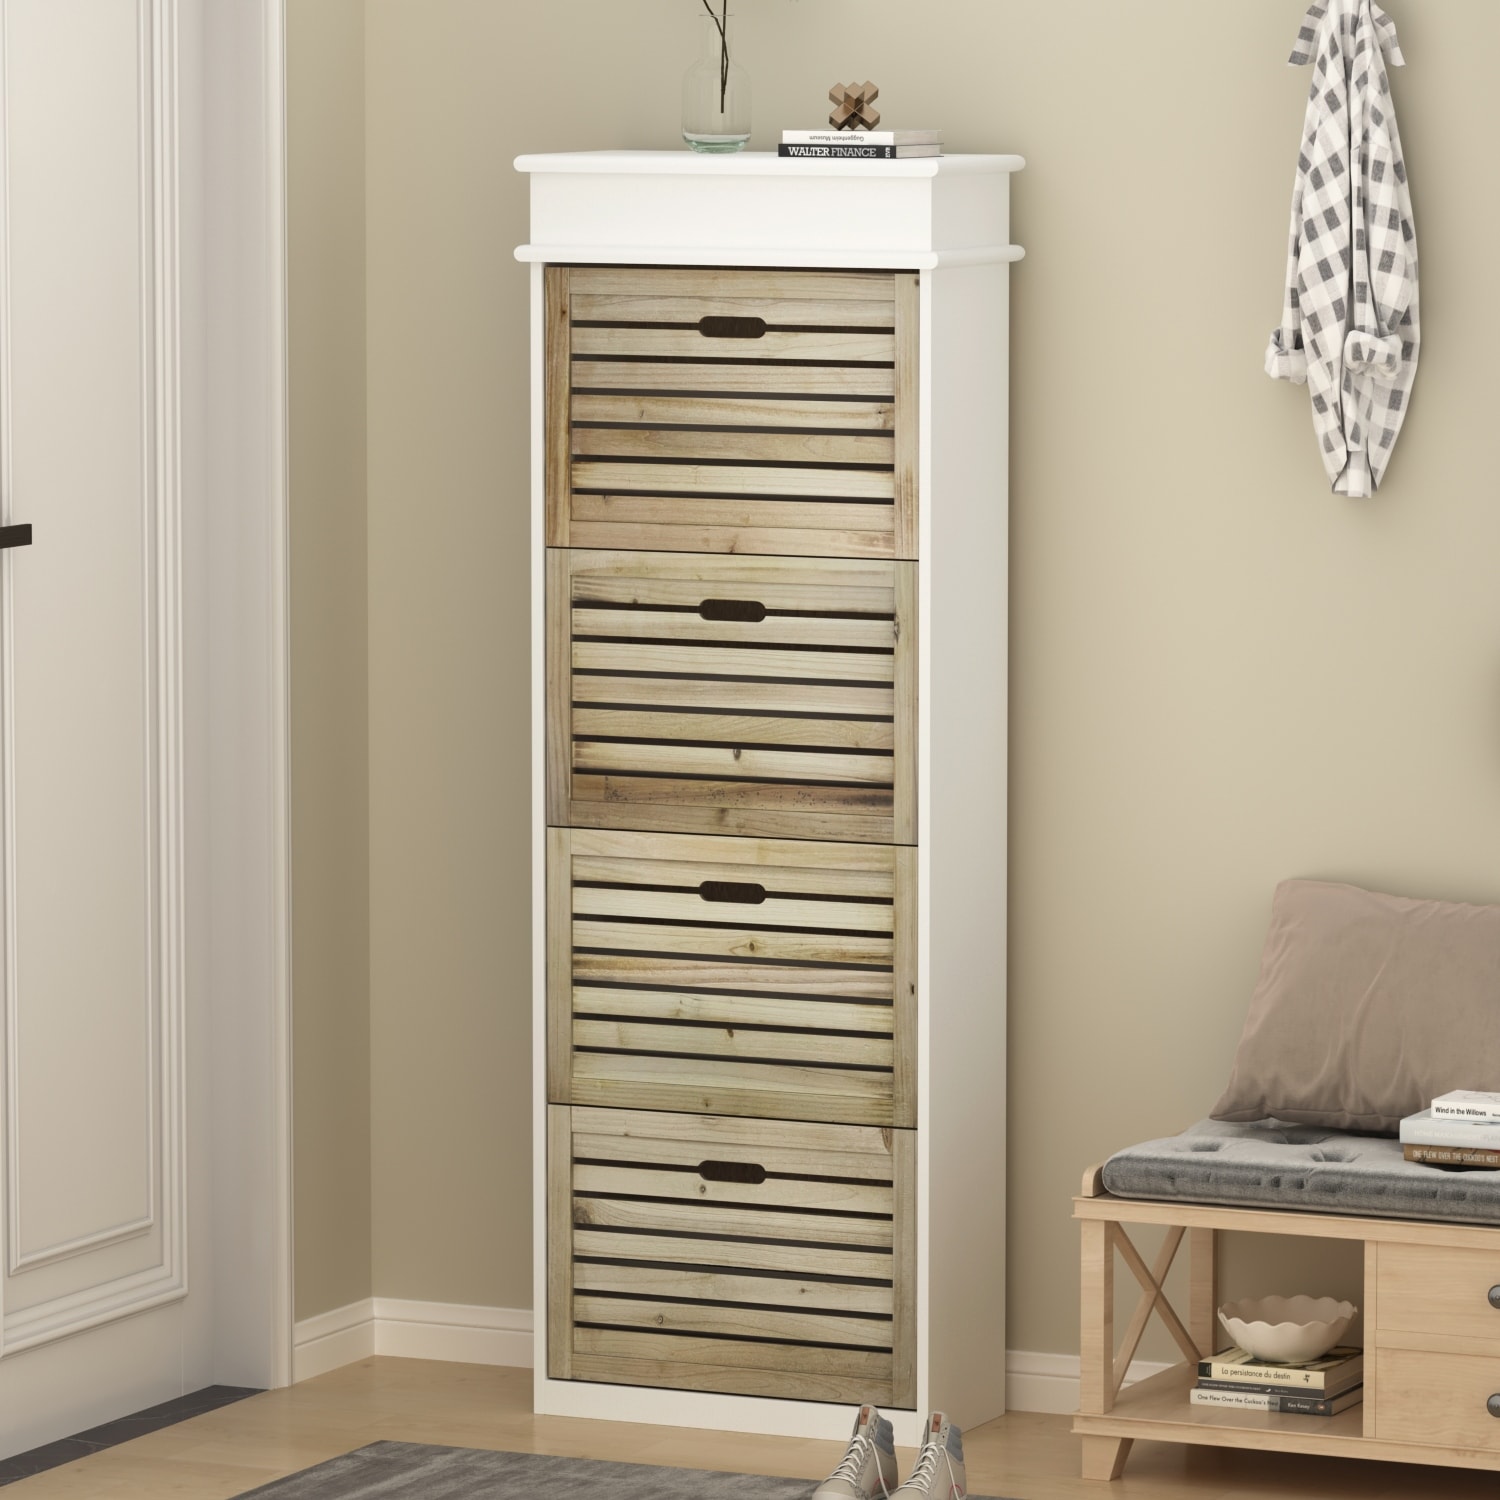 https://ak1.ostkcdn.com/images/products/is/images/direct/6432a3516ef949815d896f464f72f17d74a2d814/16-Pair-Shoe-Rack-Storage-Cabinet-Organizer-with-4-Drawers.jpg